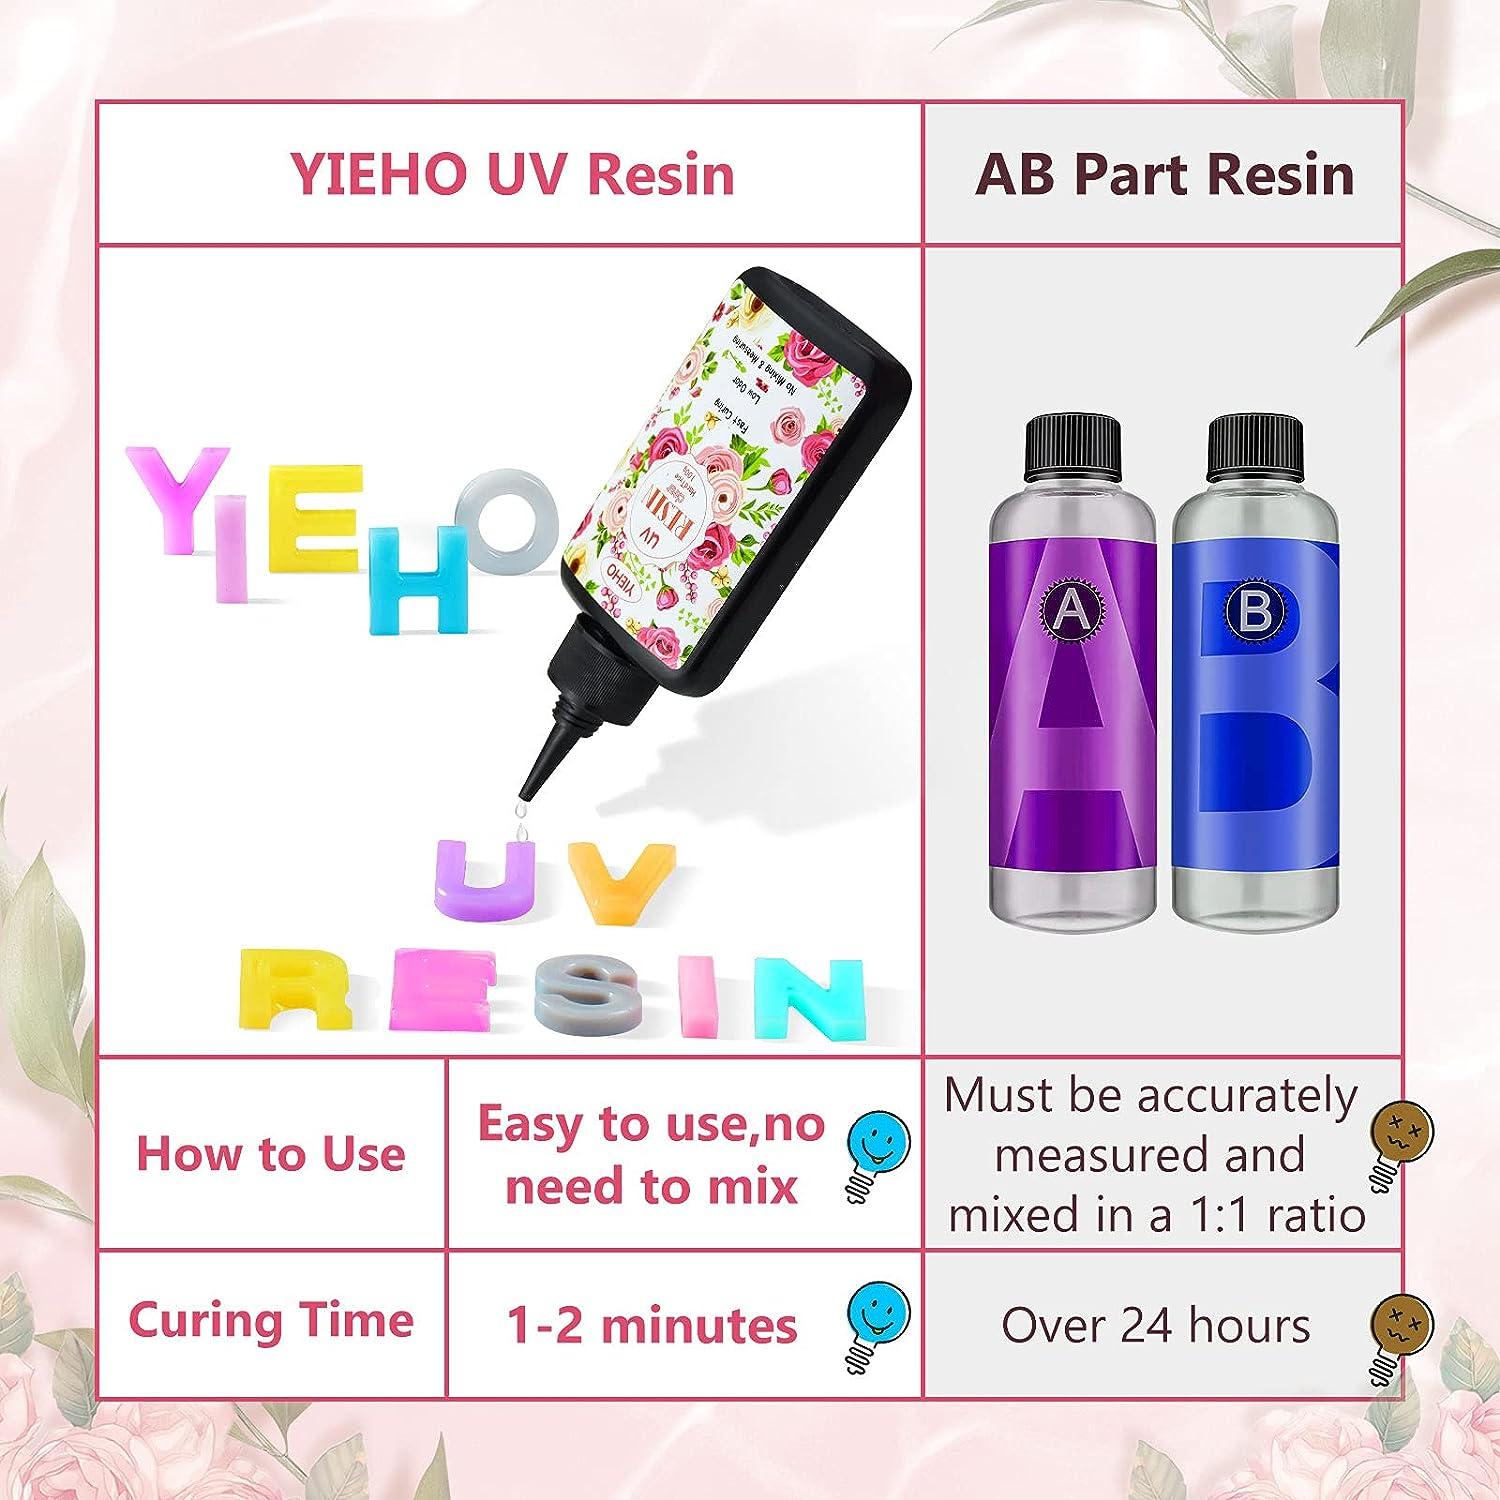 All In One Hard UV Resin Kit Upgraded Crystal Clear Epoxy Resin Up Premixed  UV Cure Resin for Craft DIY Jewelry Making Tools - AliExpress